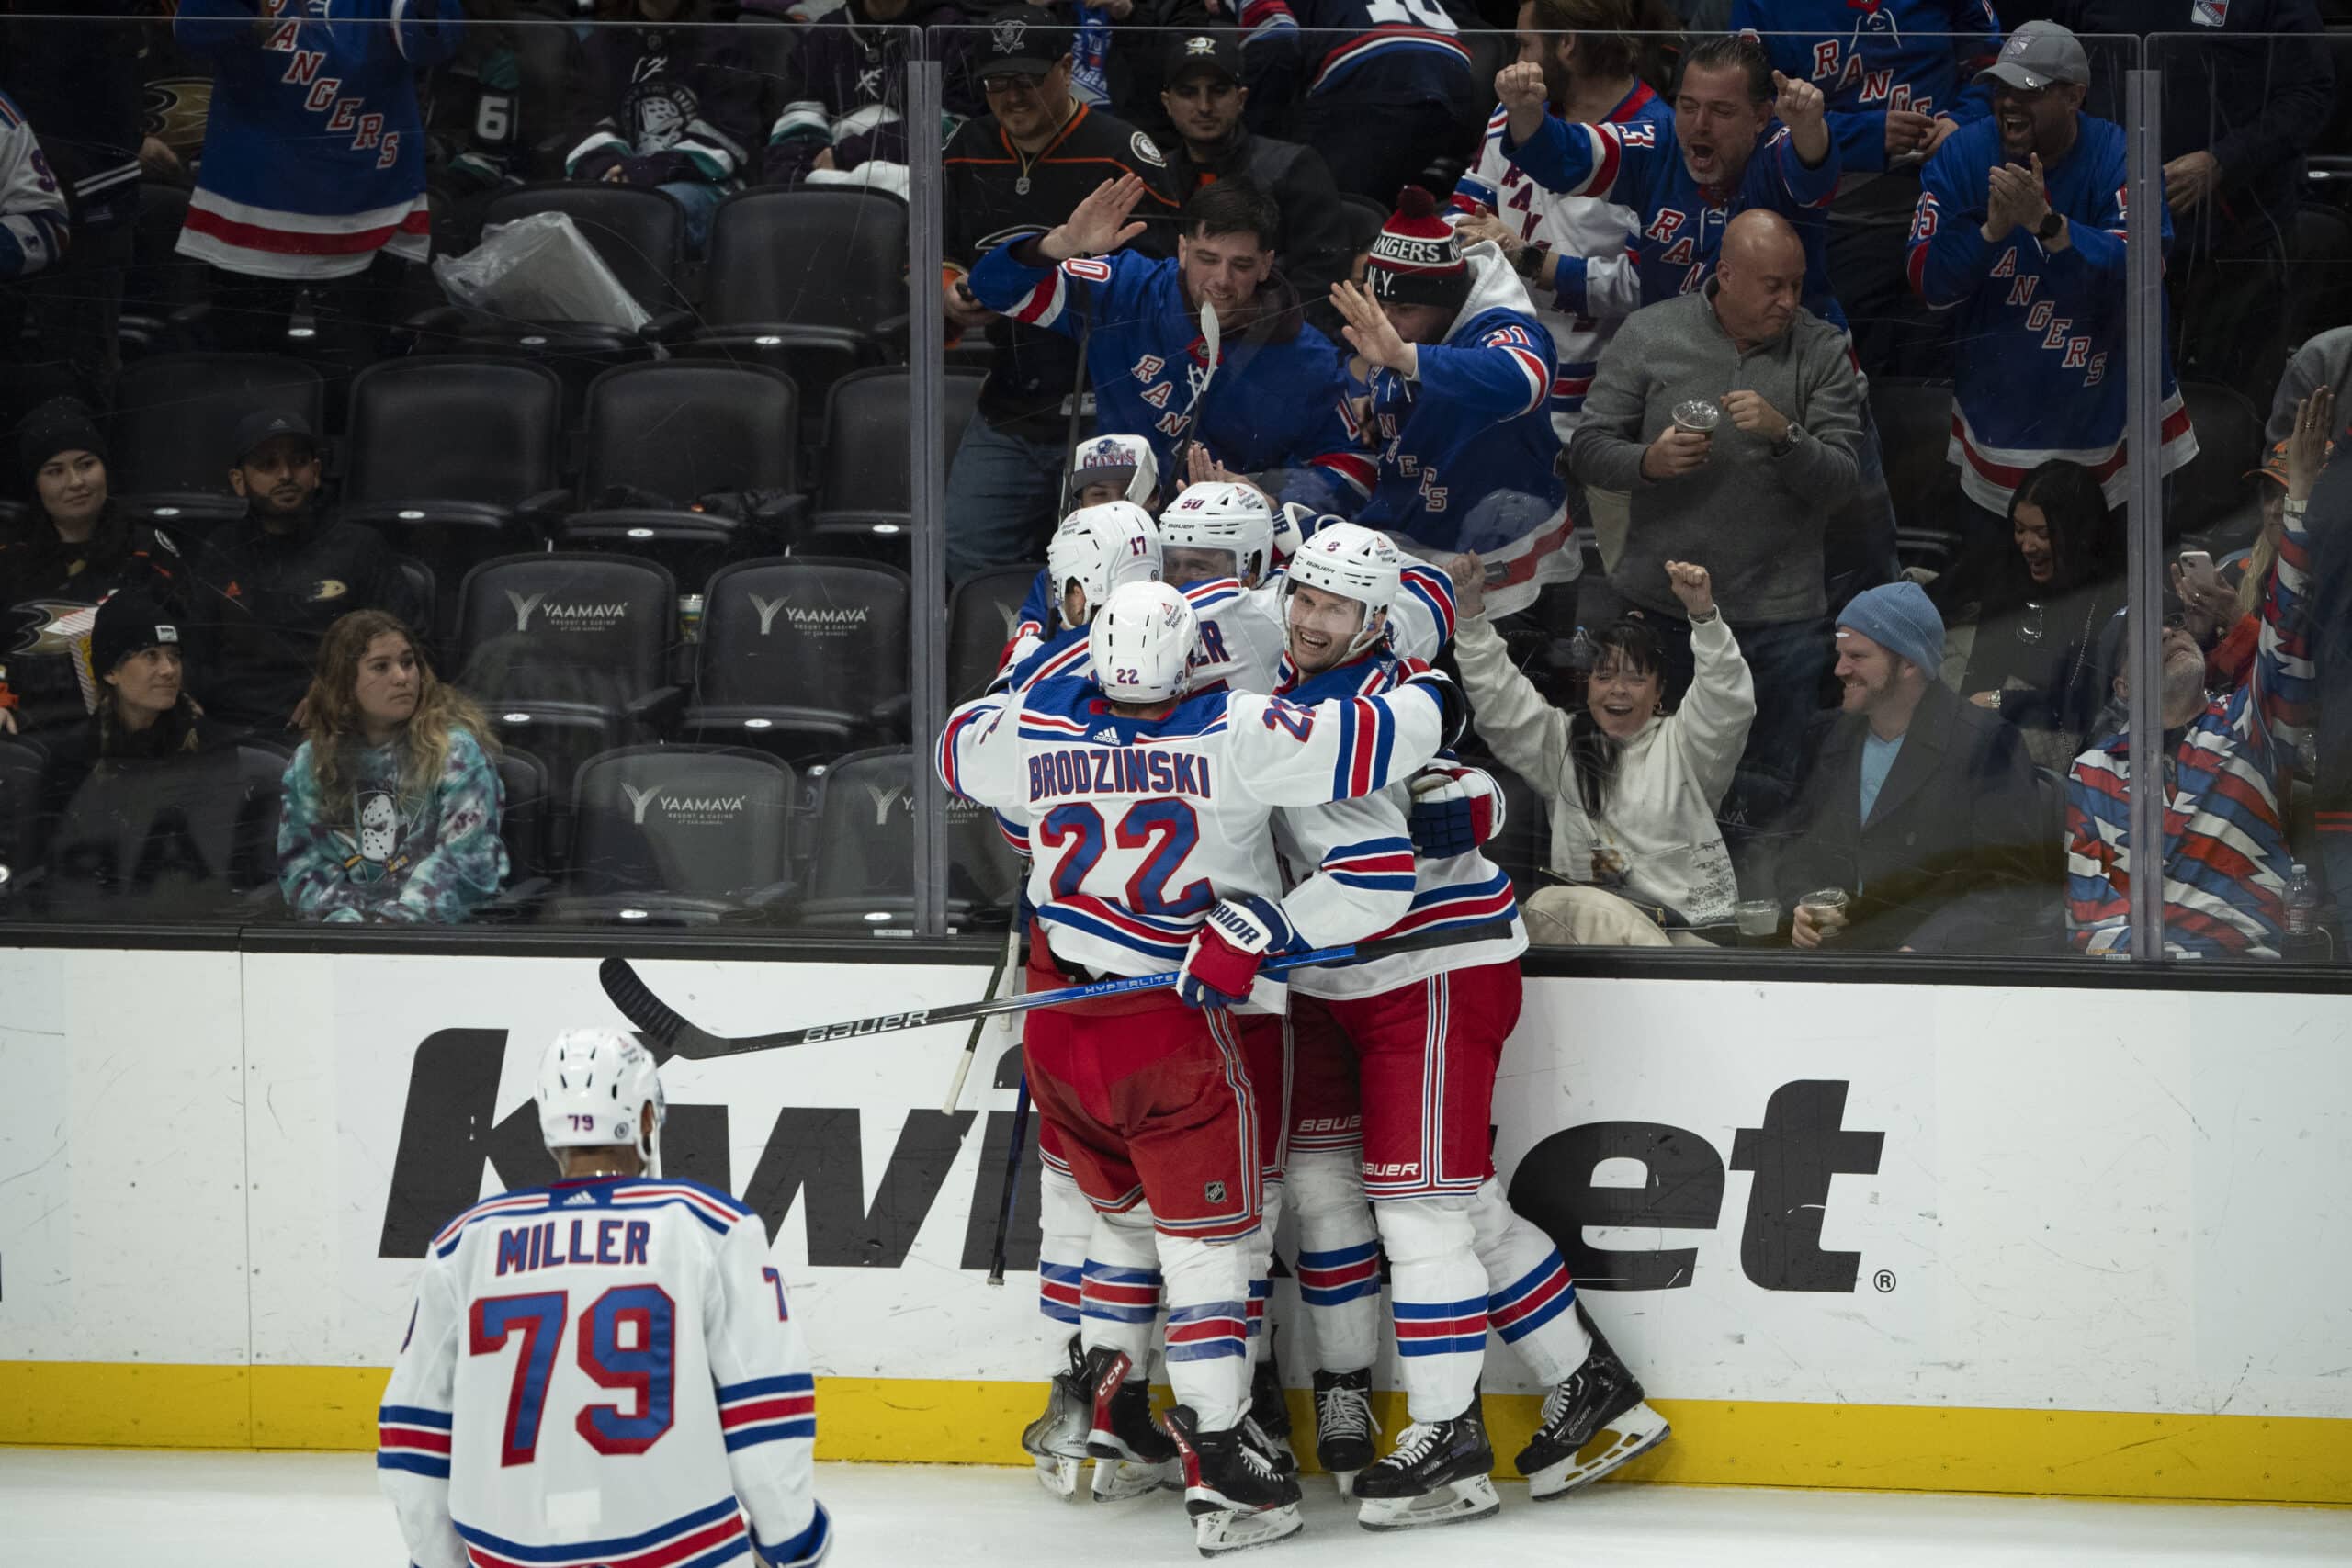 Rangers rally in 3rd period for 5-2 win over Ducks